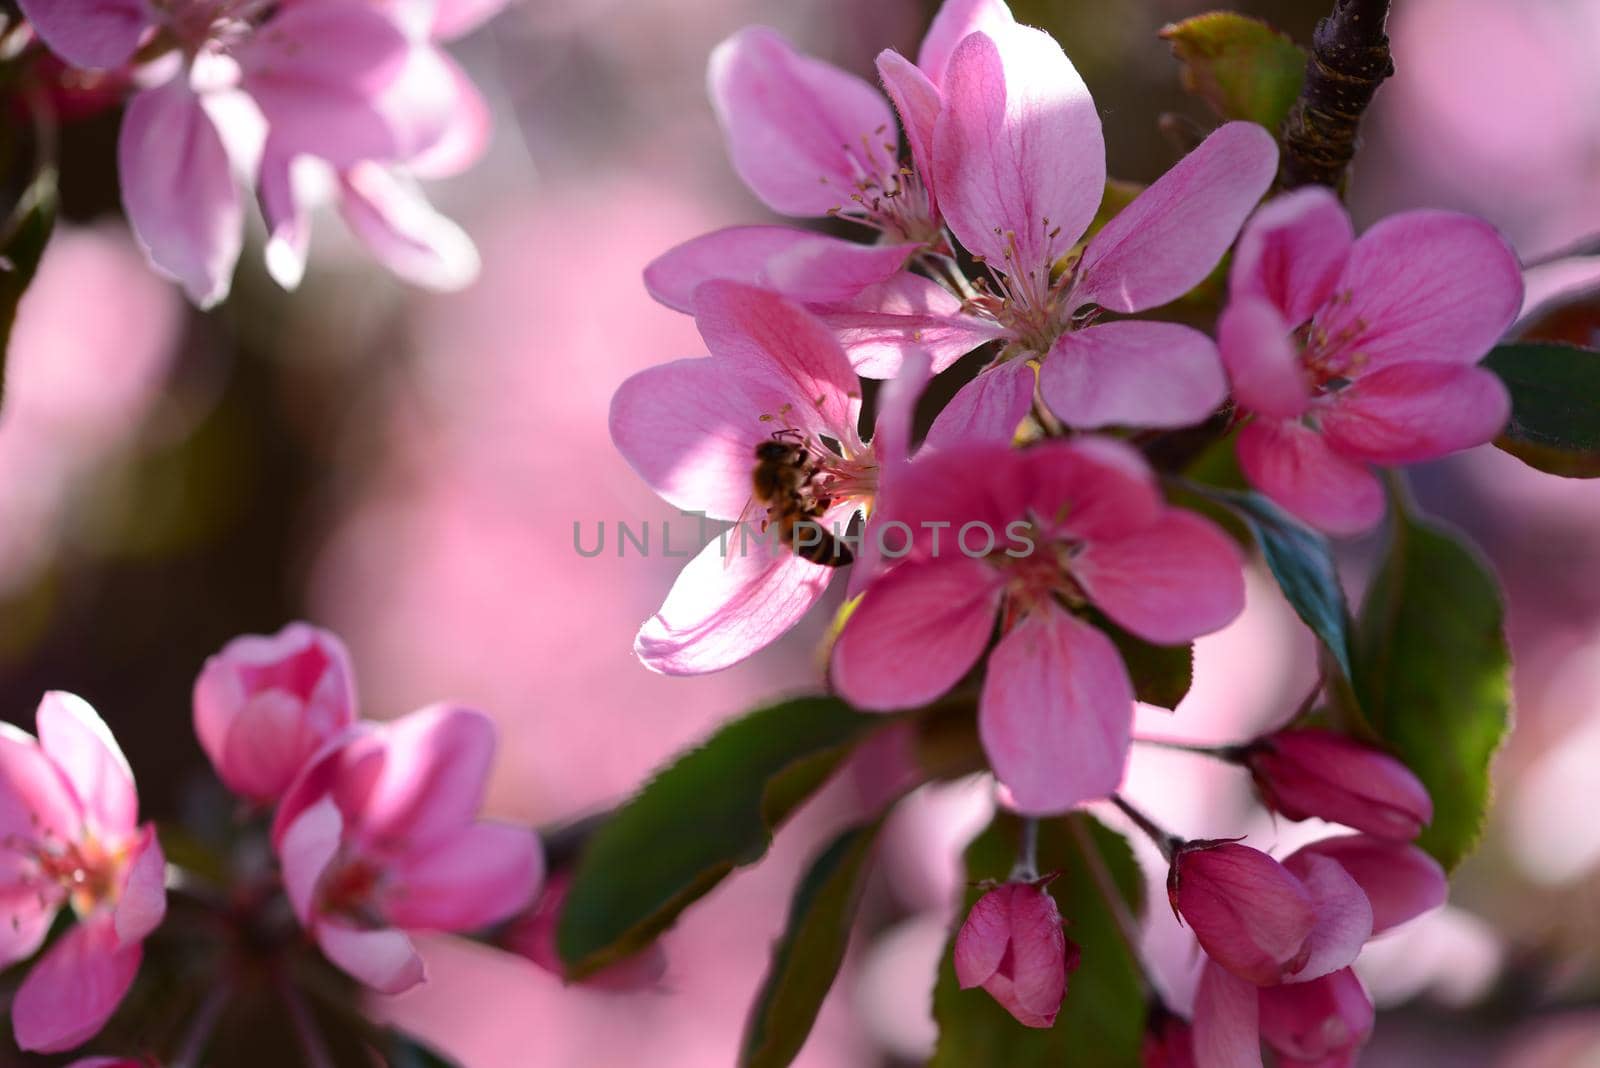 Pink flowering appletree as a close-up